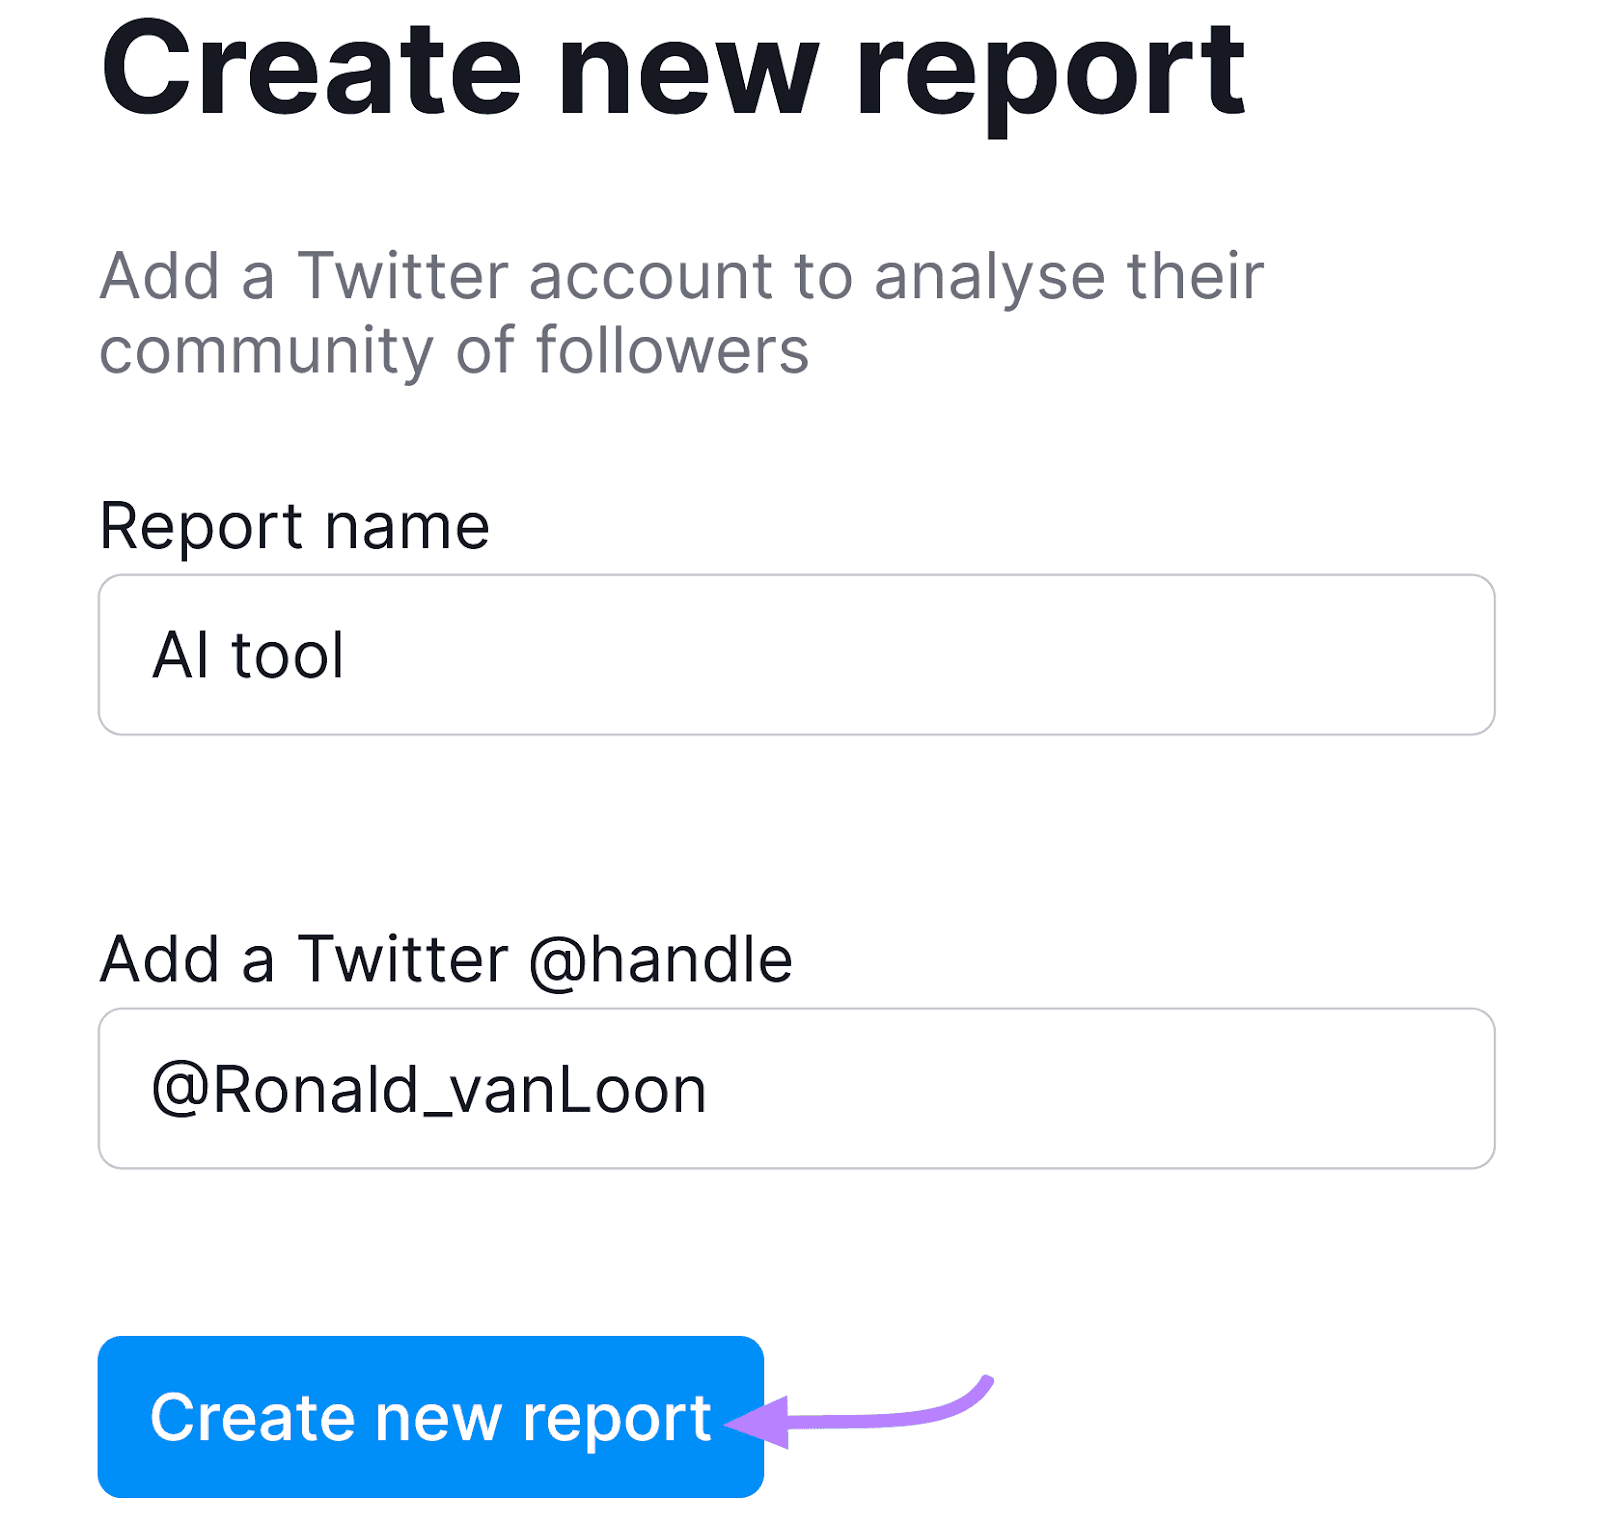 Audience Intelligence UI for creating a new report with inputs for name and Twitter handle, and a "Create new report" button.